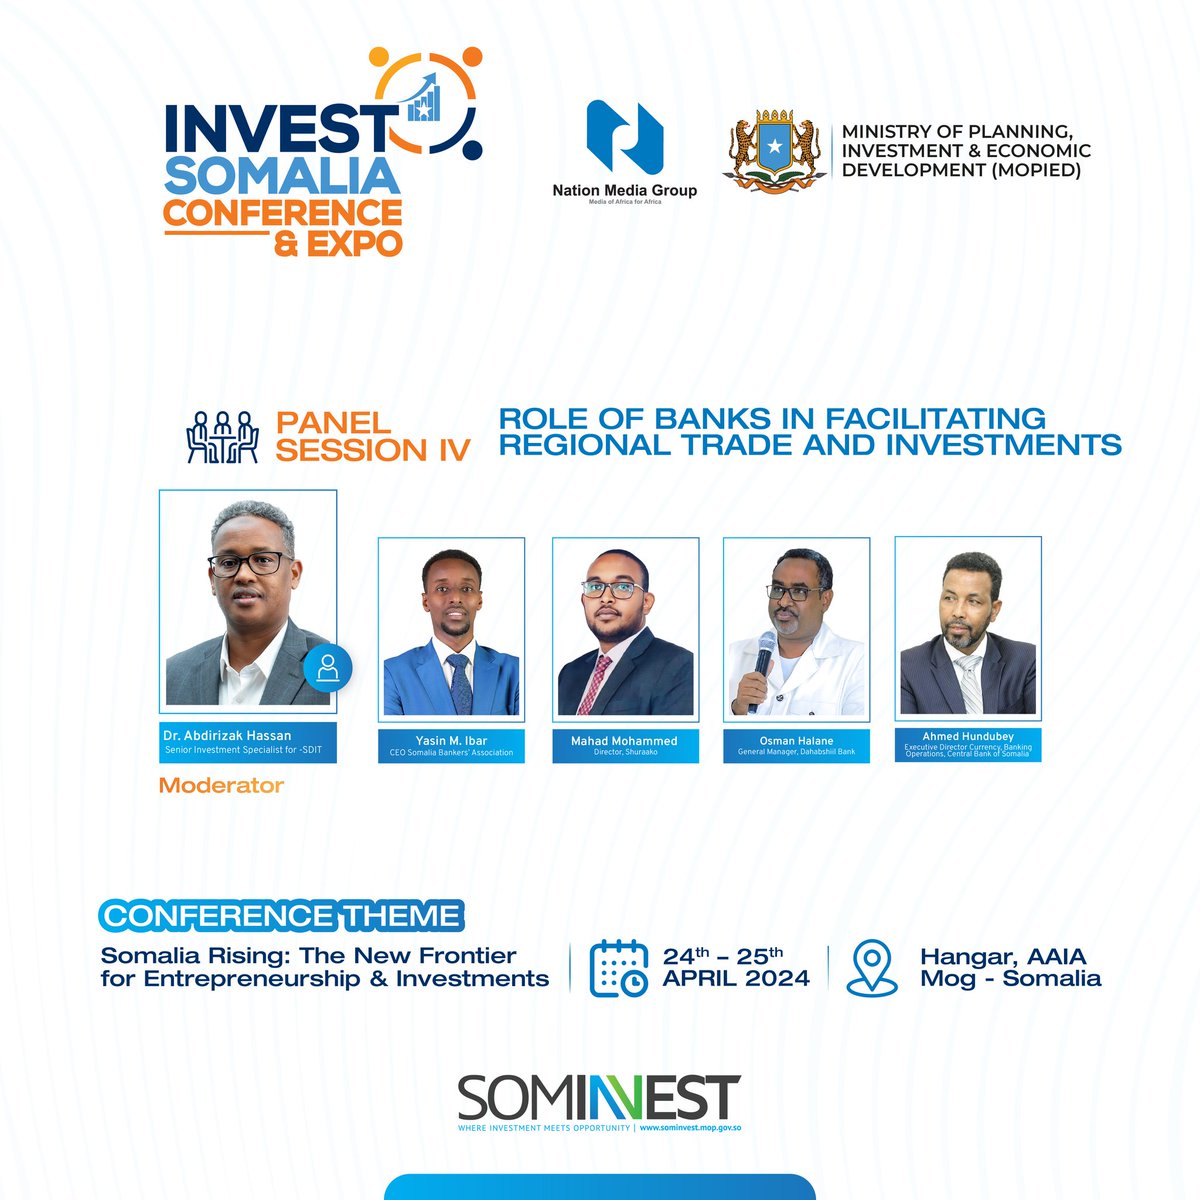 Welcome to Day 2 of the Invest Somali Conference & Expo. We begin the day with a panel discussion on the role of banks in regional trade and investment. @MoPIED_Somalia #InvestSomali2024